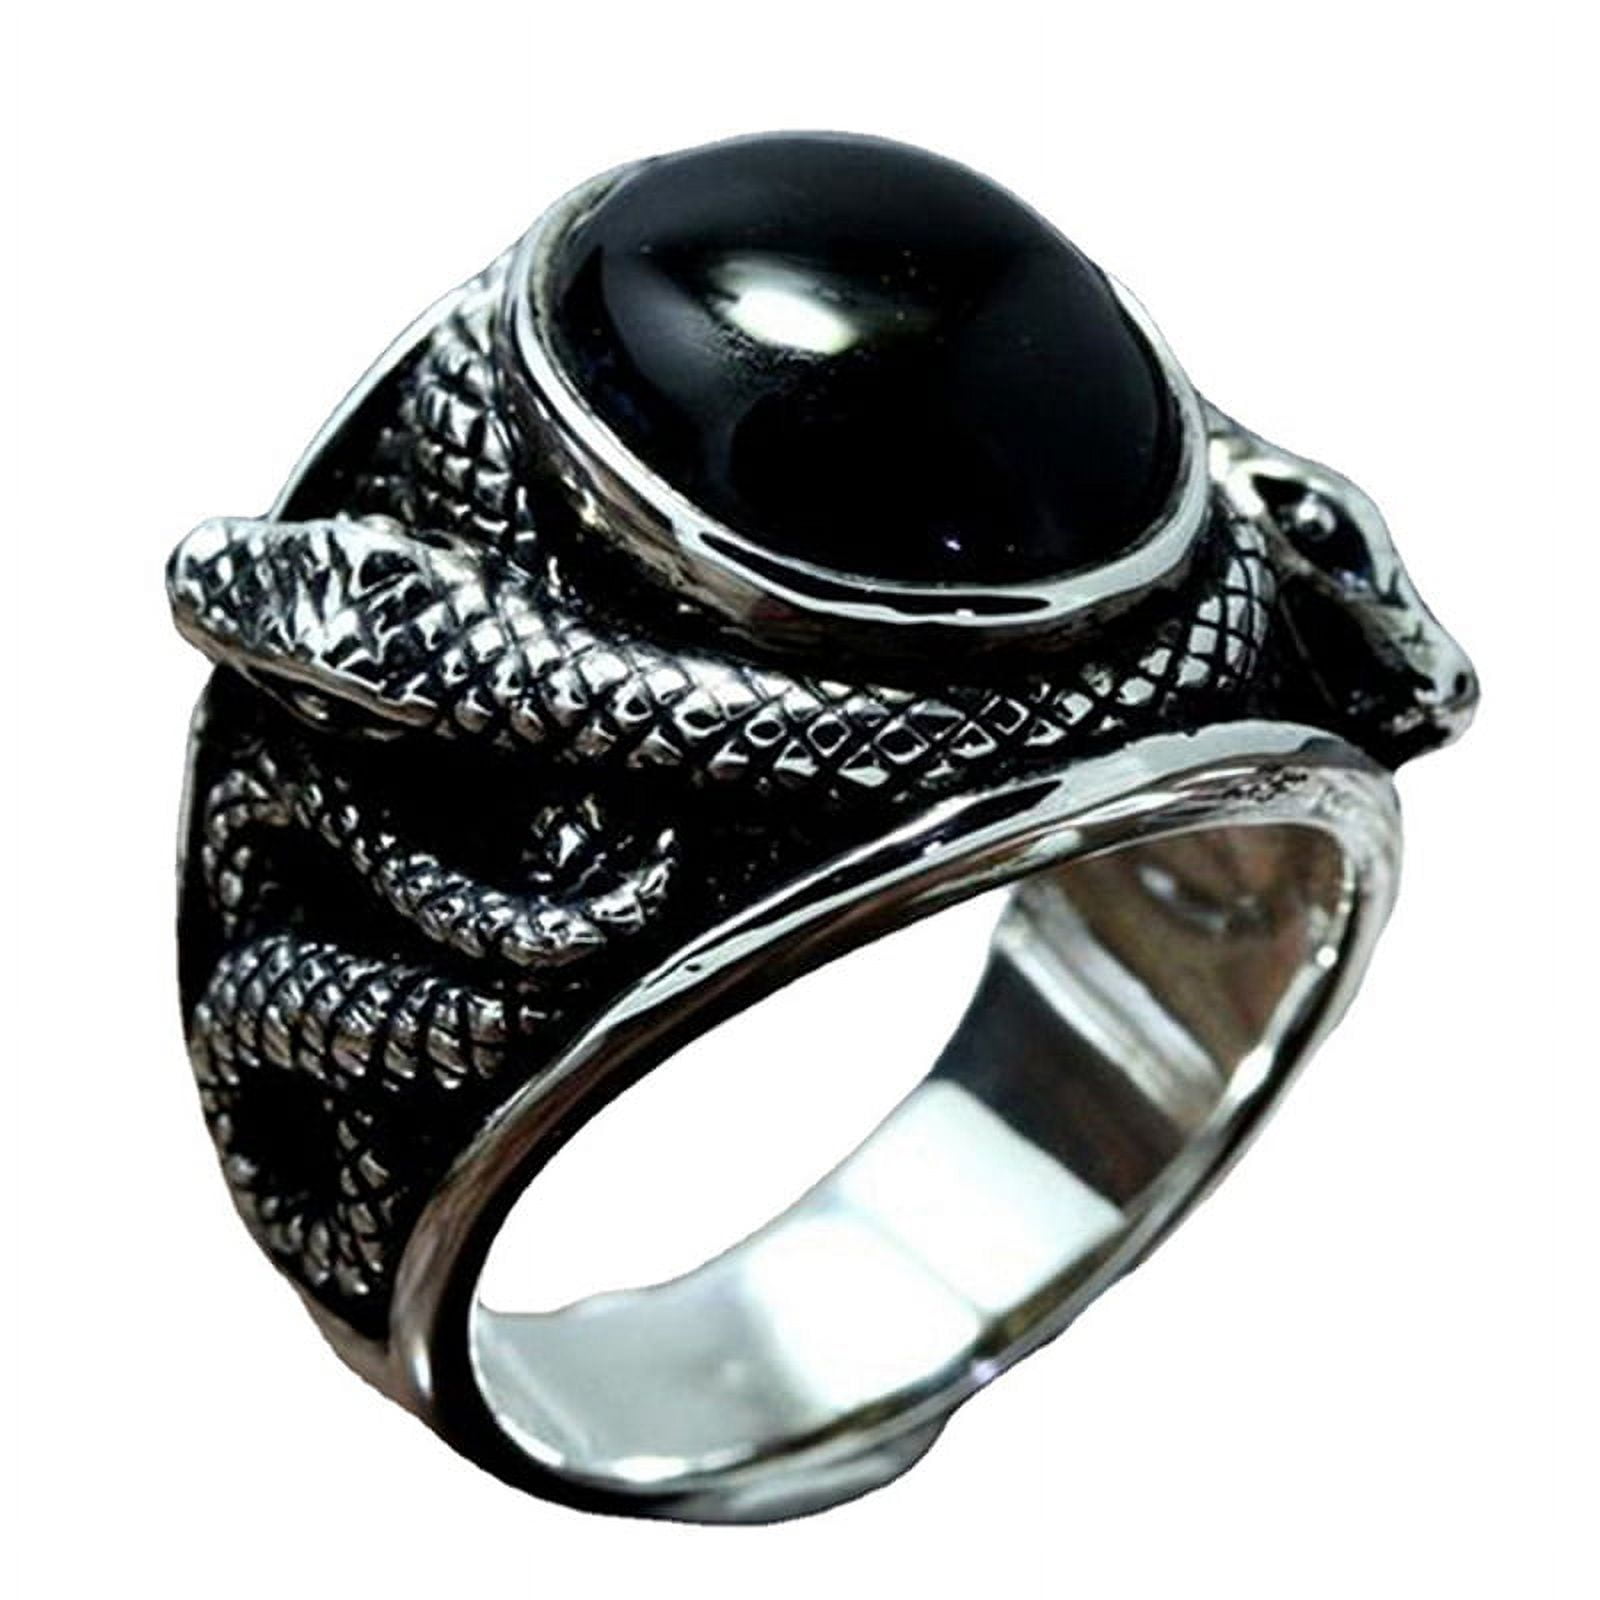 Buy COLOUR OUR DREAMS Trending Black Studded Ring And Black Square Curved  Ring For Boys And Men (Pack Of 2) Online In India At Discounted Prices